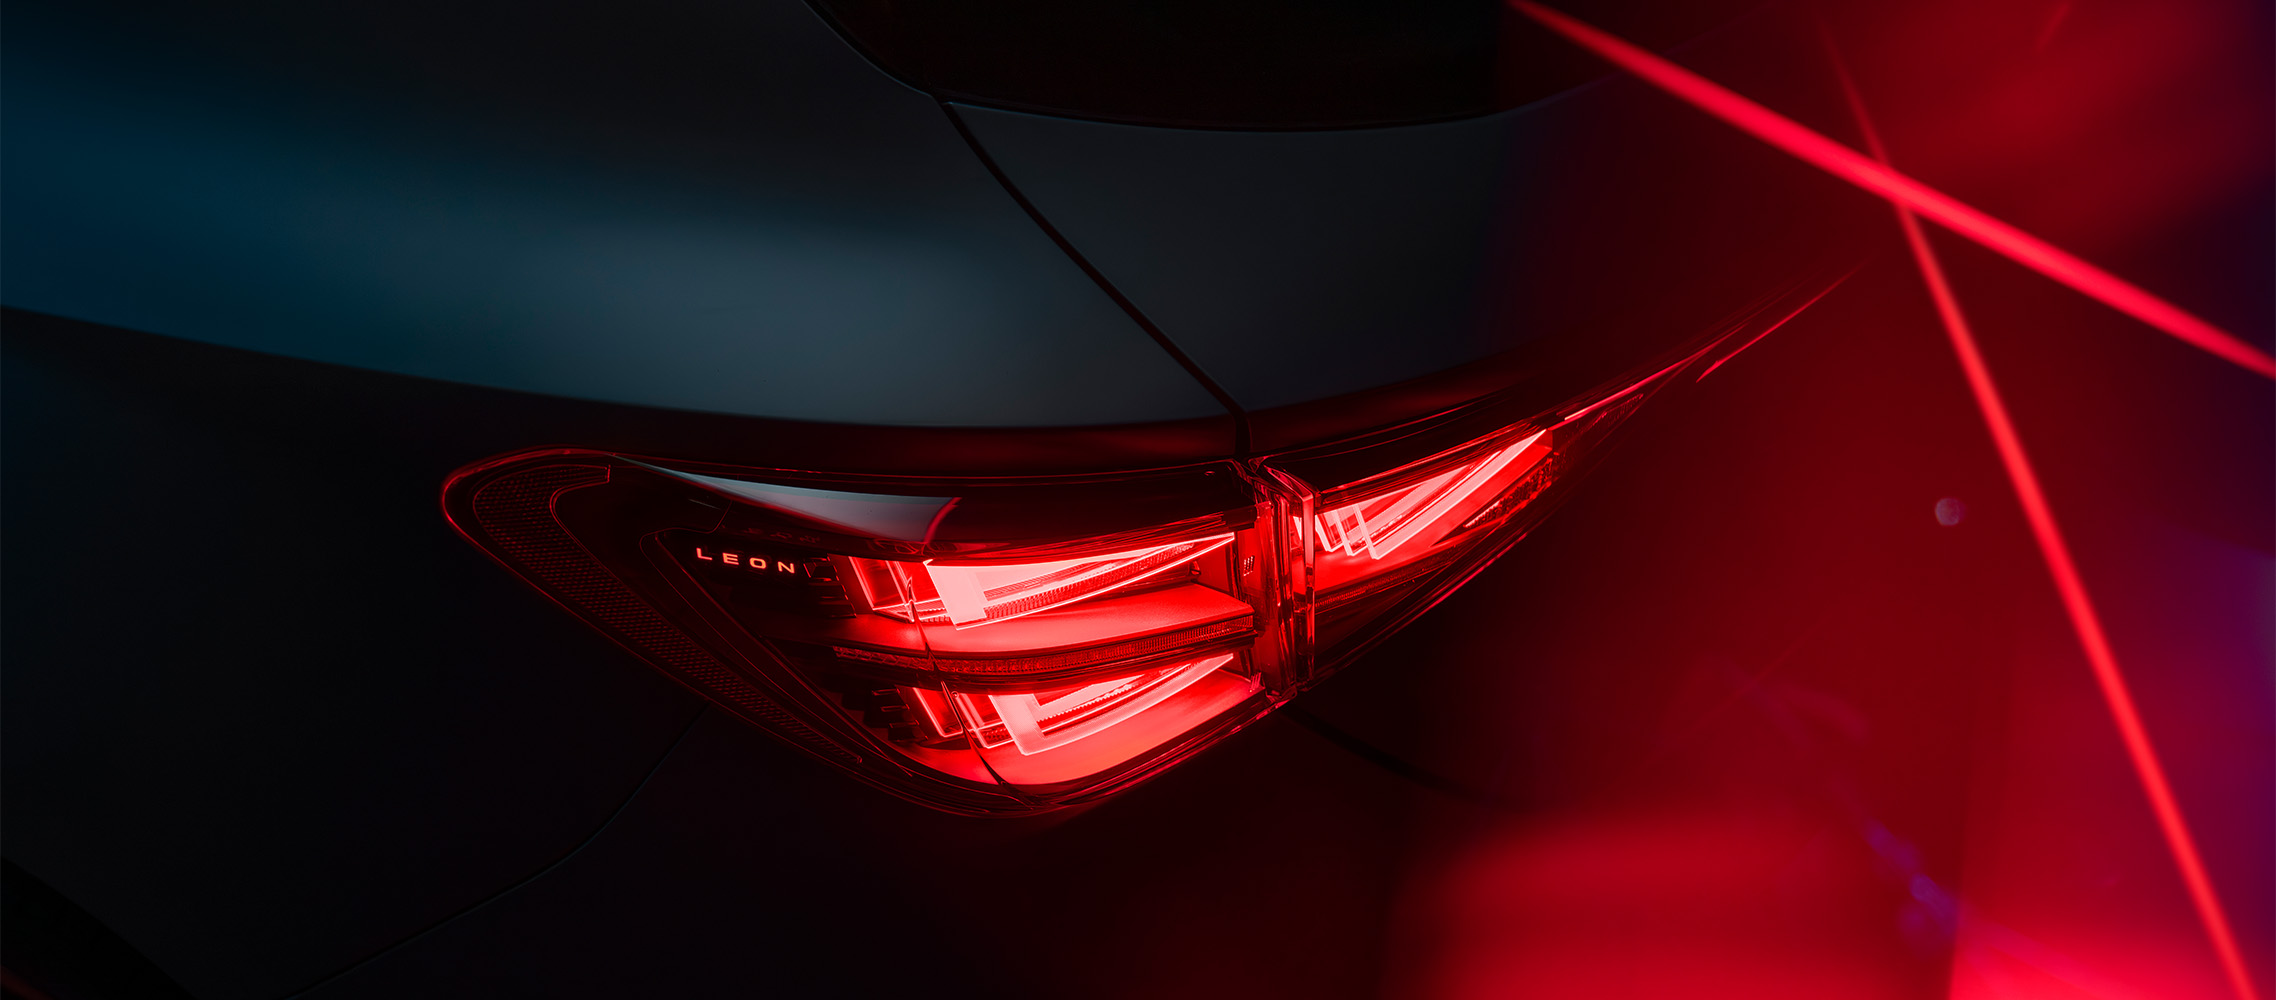 side view of a new 2024 cupra leon's red rear light, highlighting the sleek lines and lighting design against a dark background.​